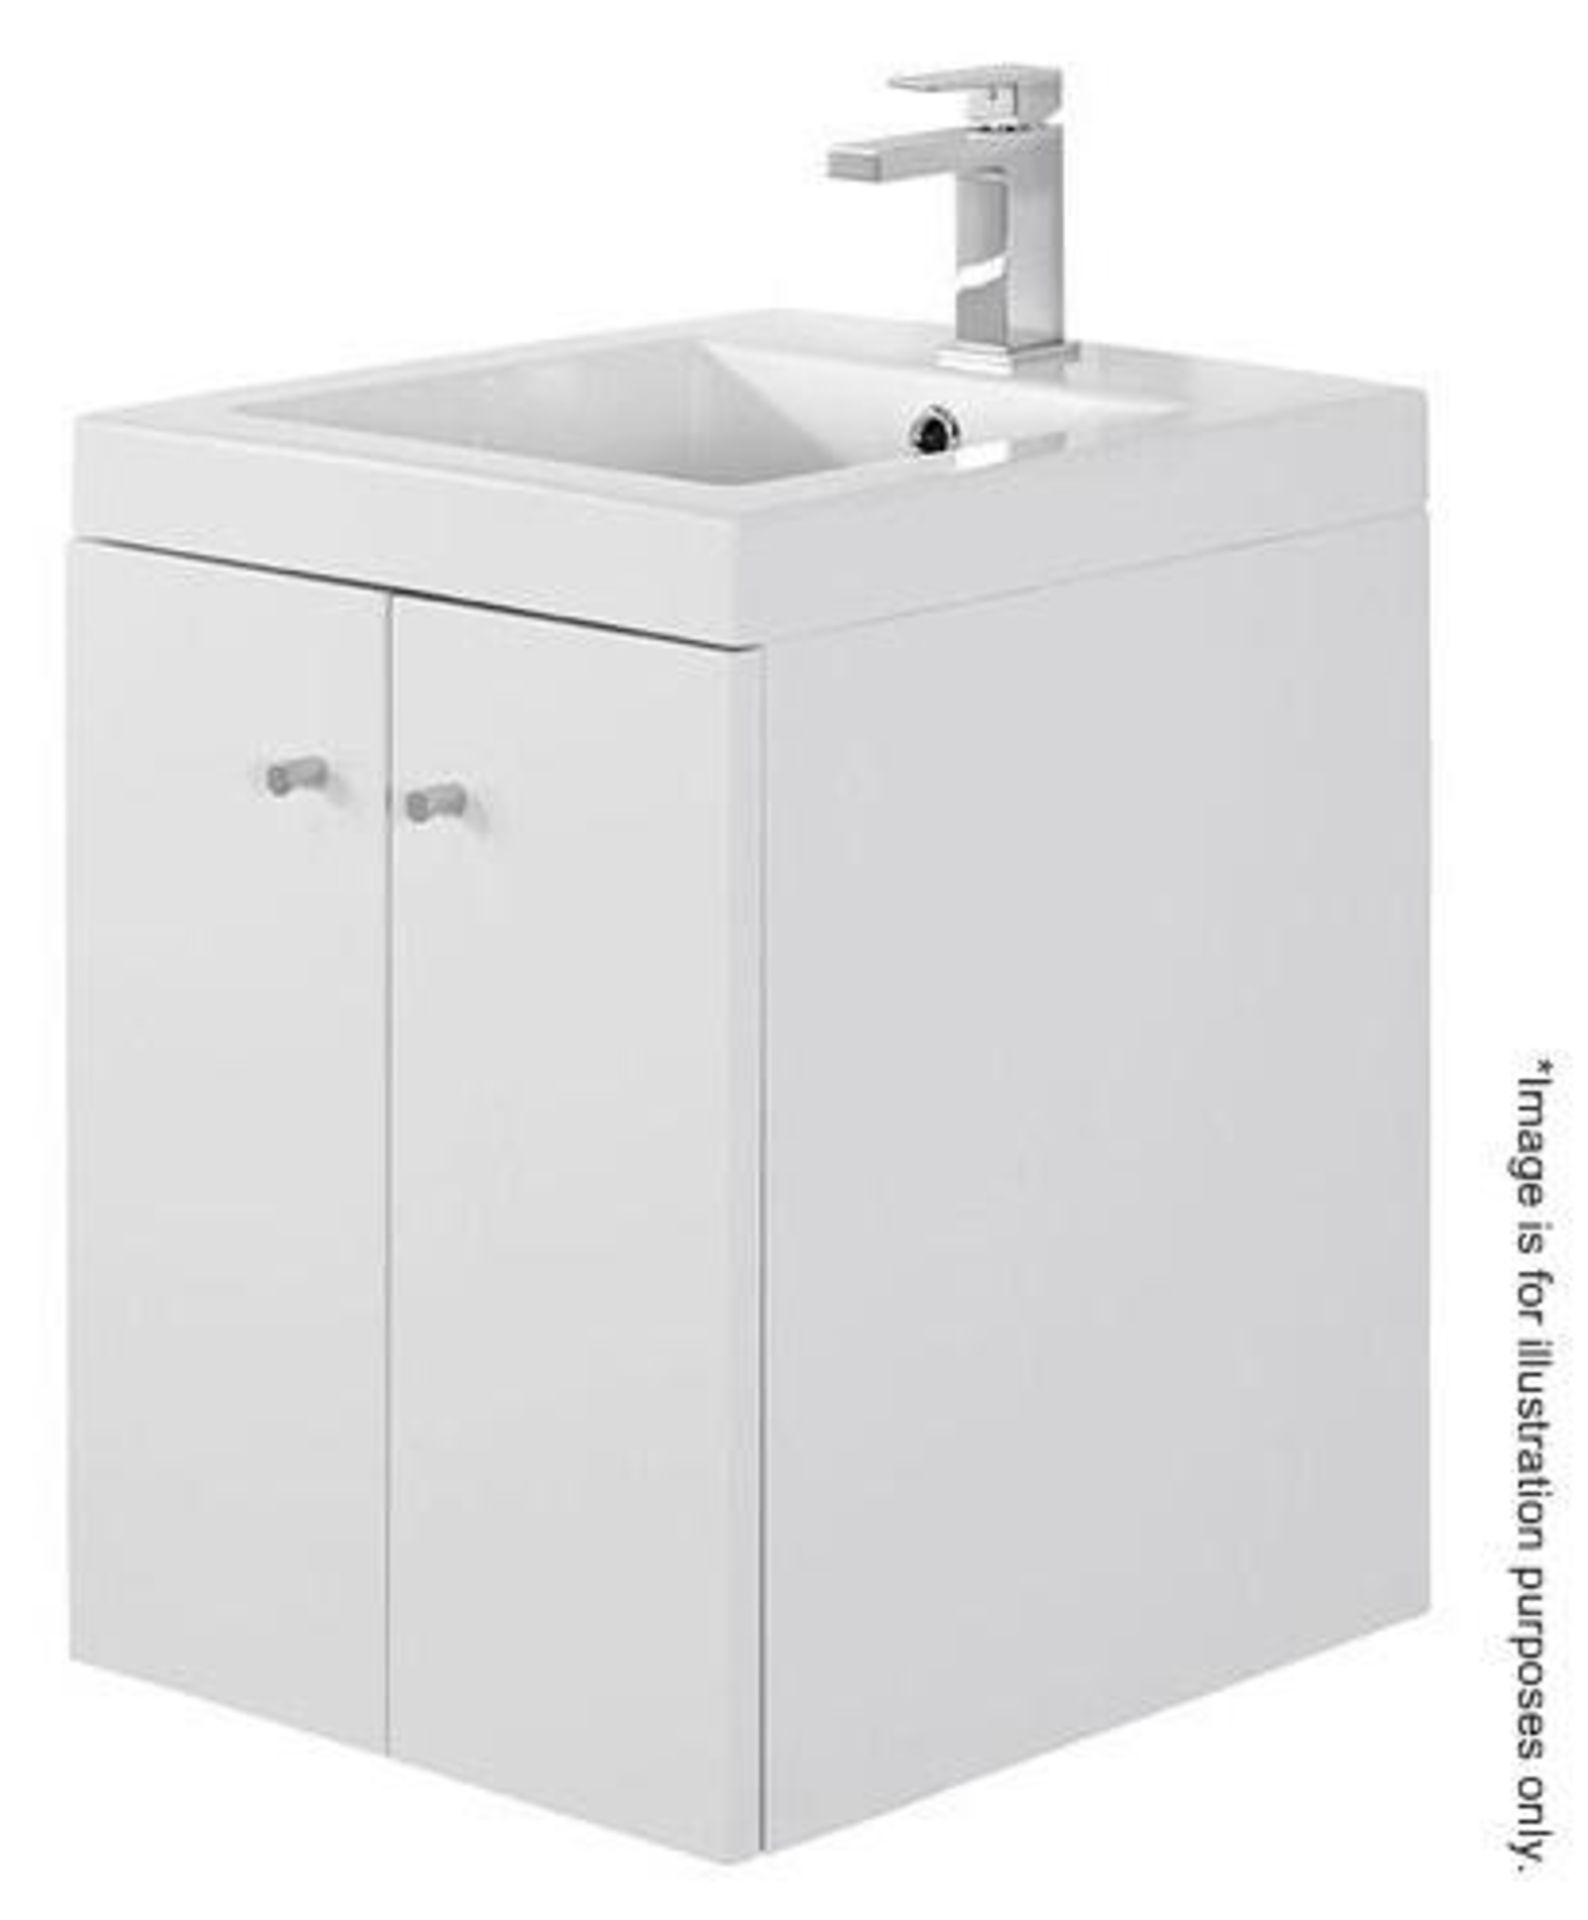 10 x Alpine Duo 400 Wall Hung Vanity Units In Gloss White - Brand New Boxed Stock - Dimensions: H49 - Image 2 of 5